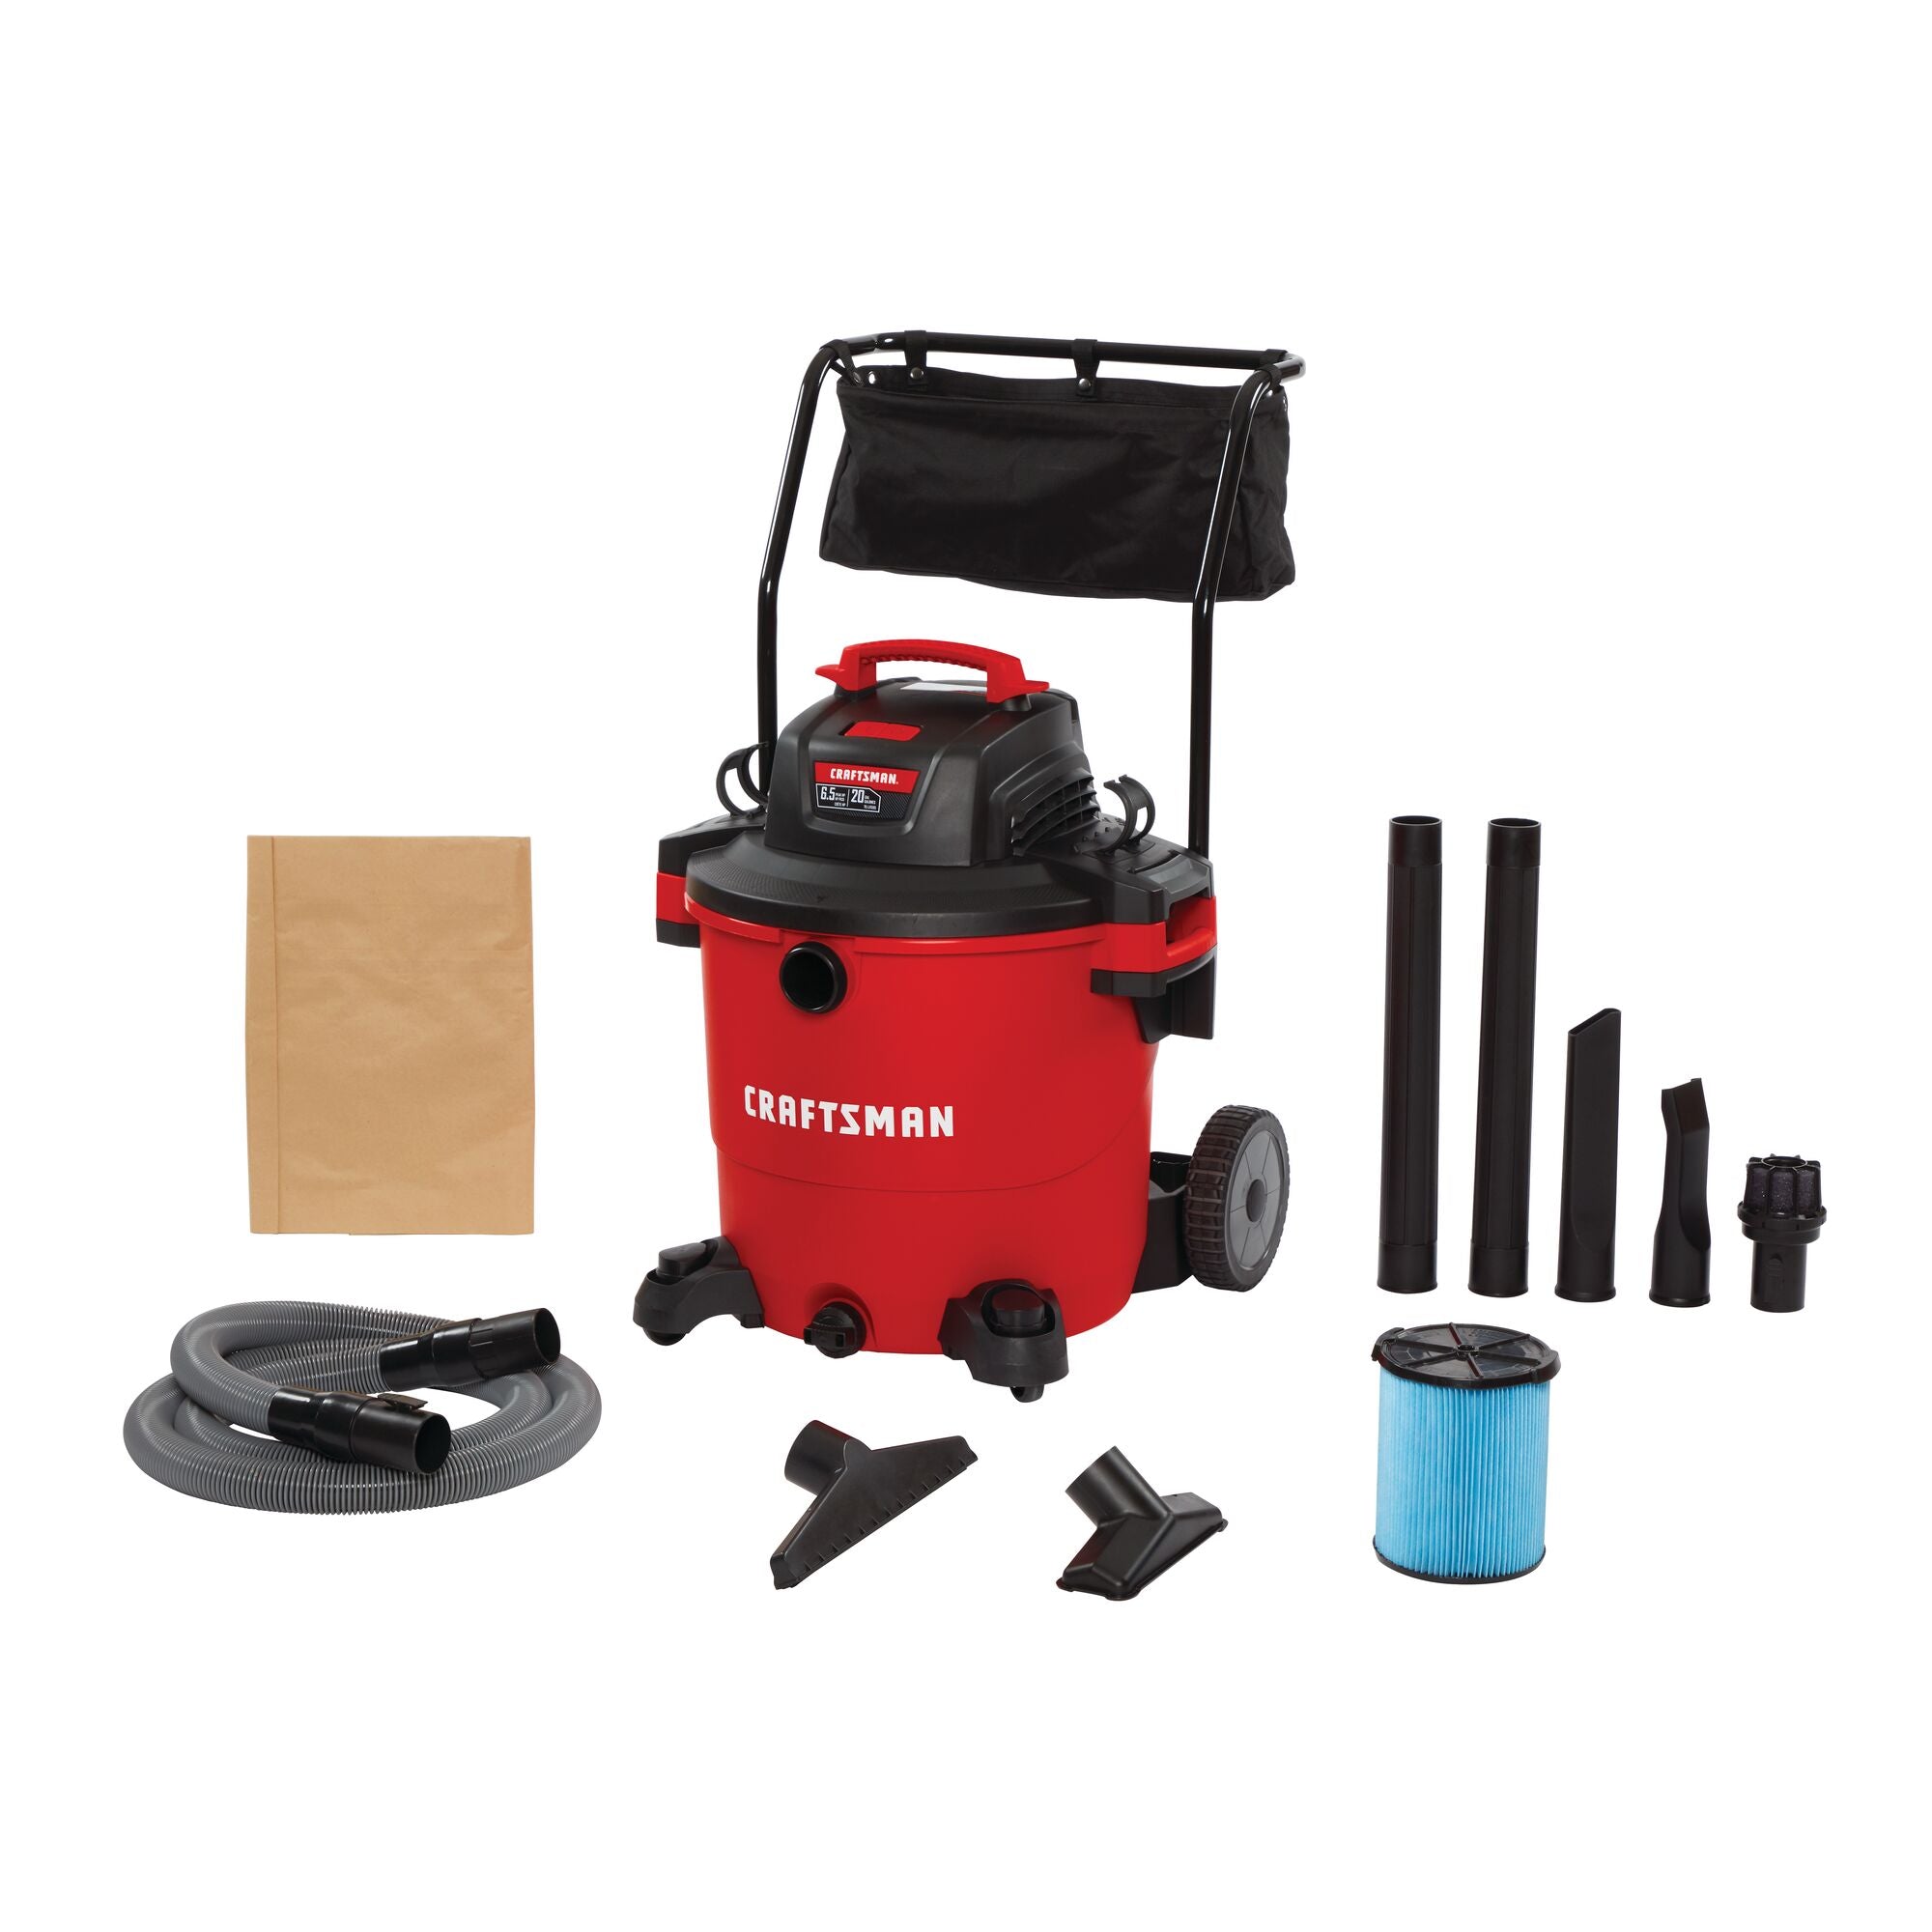 20 gallon 6.5 H P wet dry vacuum with cart and complete kit.